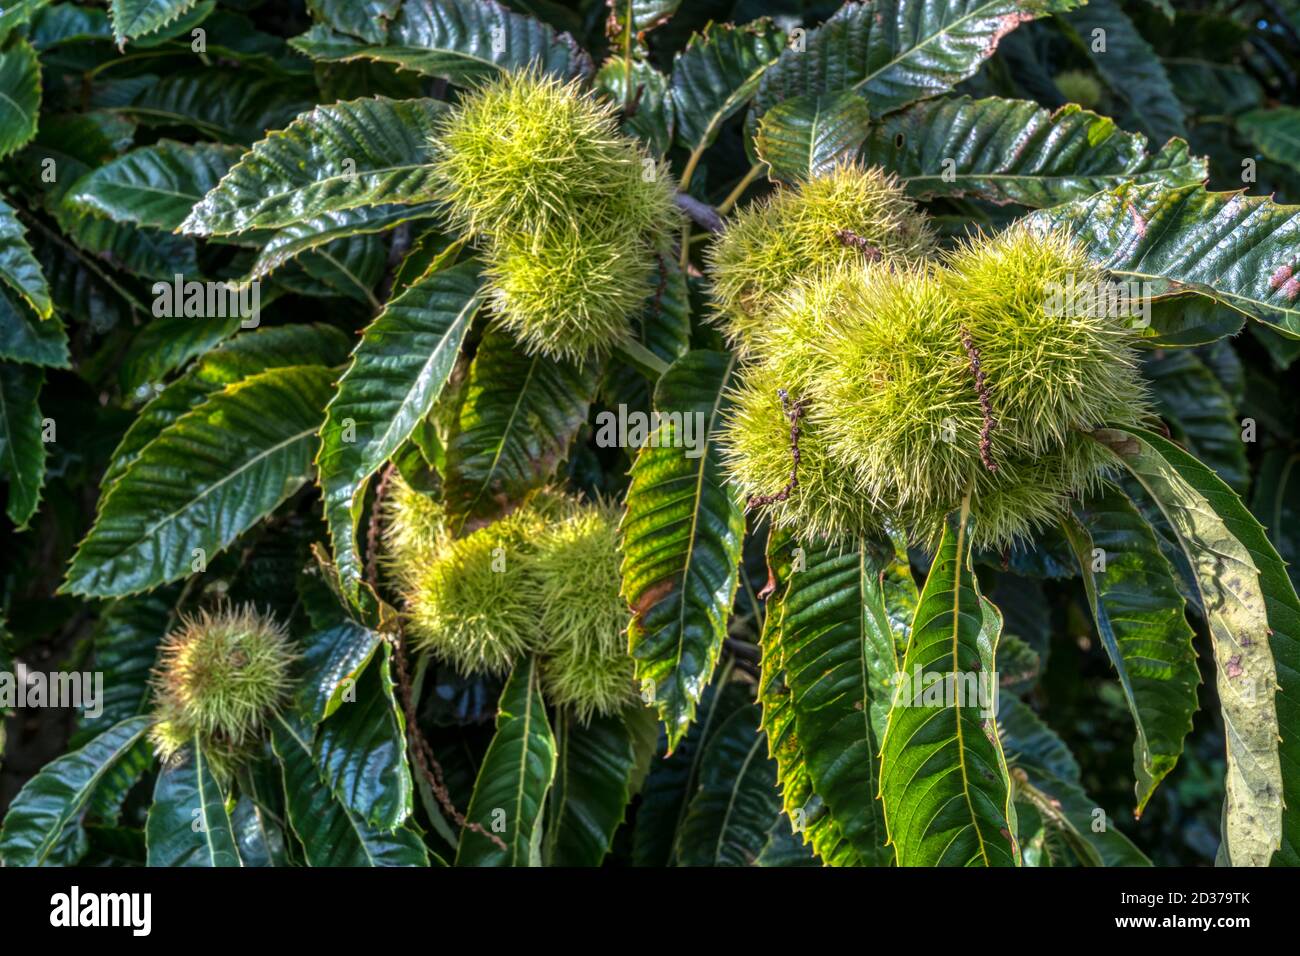 Sweet chestnut tree, Castanea sativa, with spiky cupules containing the edible seed or chestnut. Stock Photo